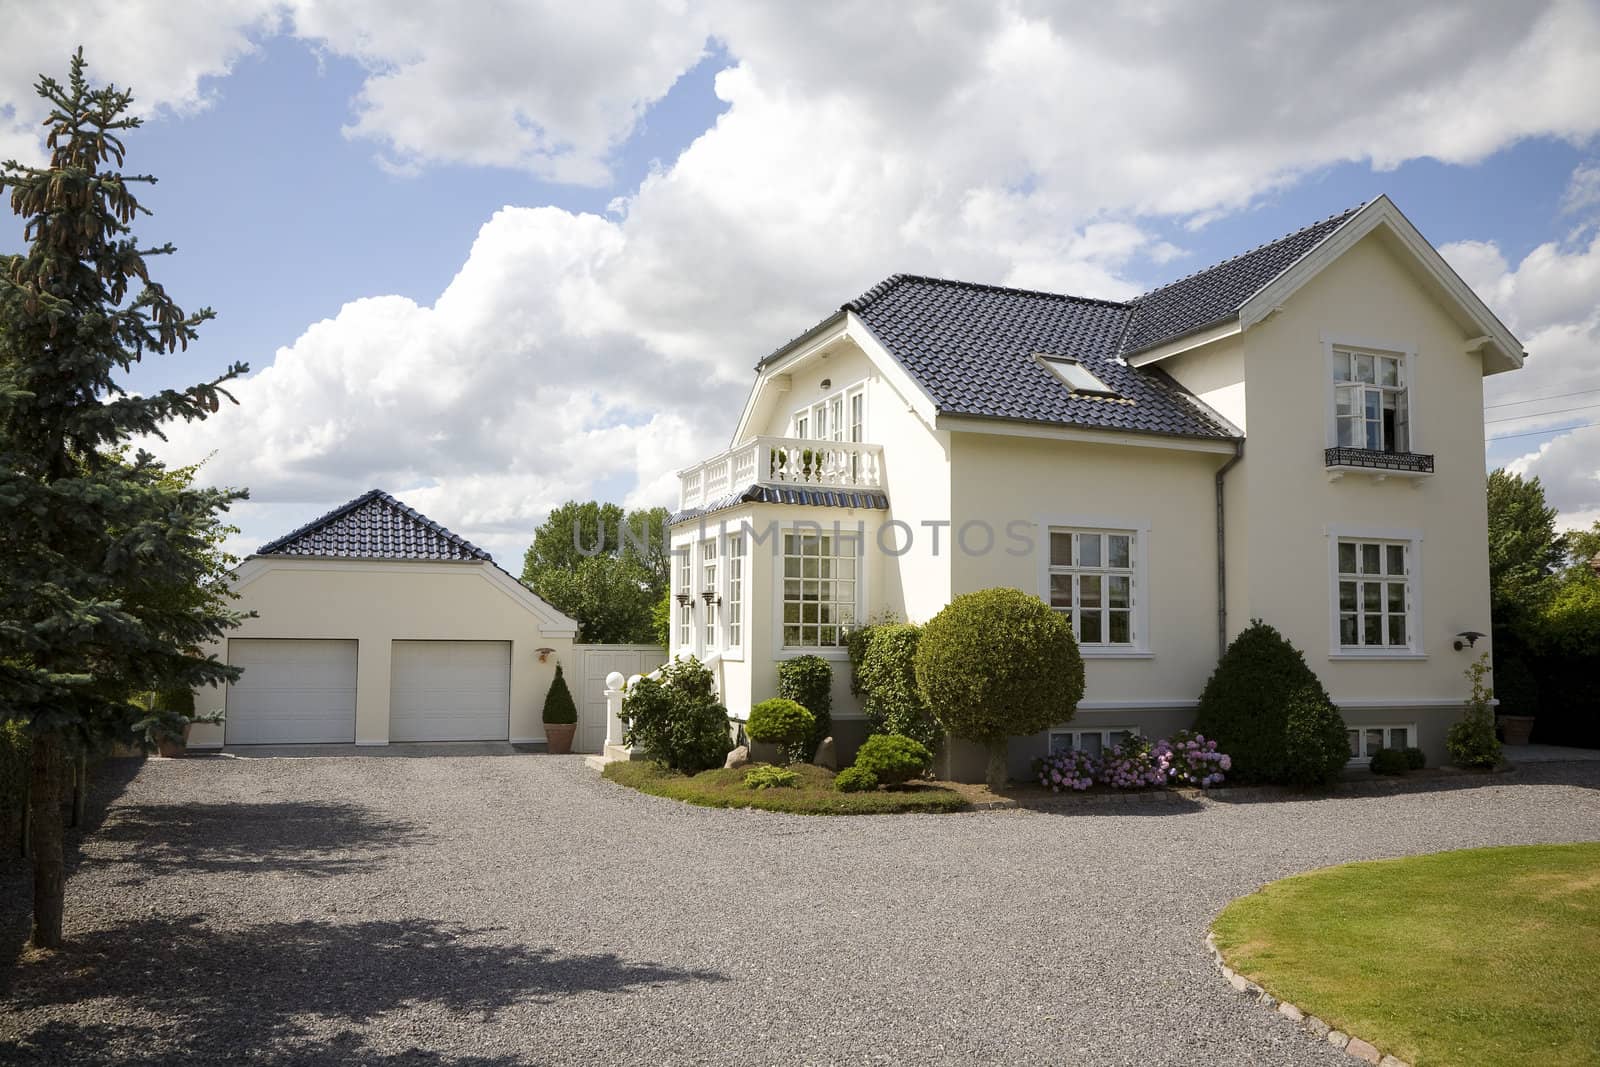 Old renovated villa and nice driveway Denmark.